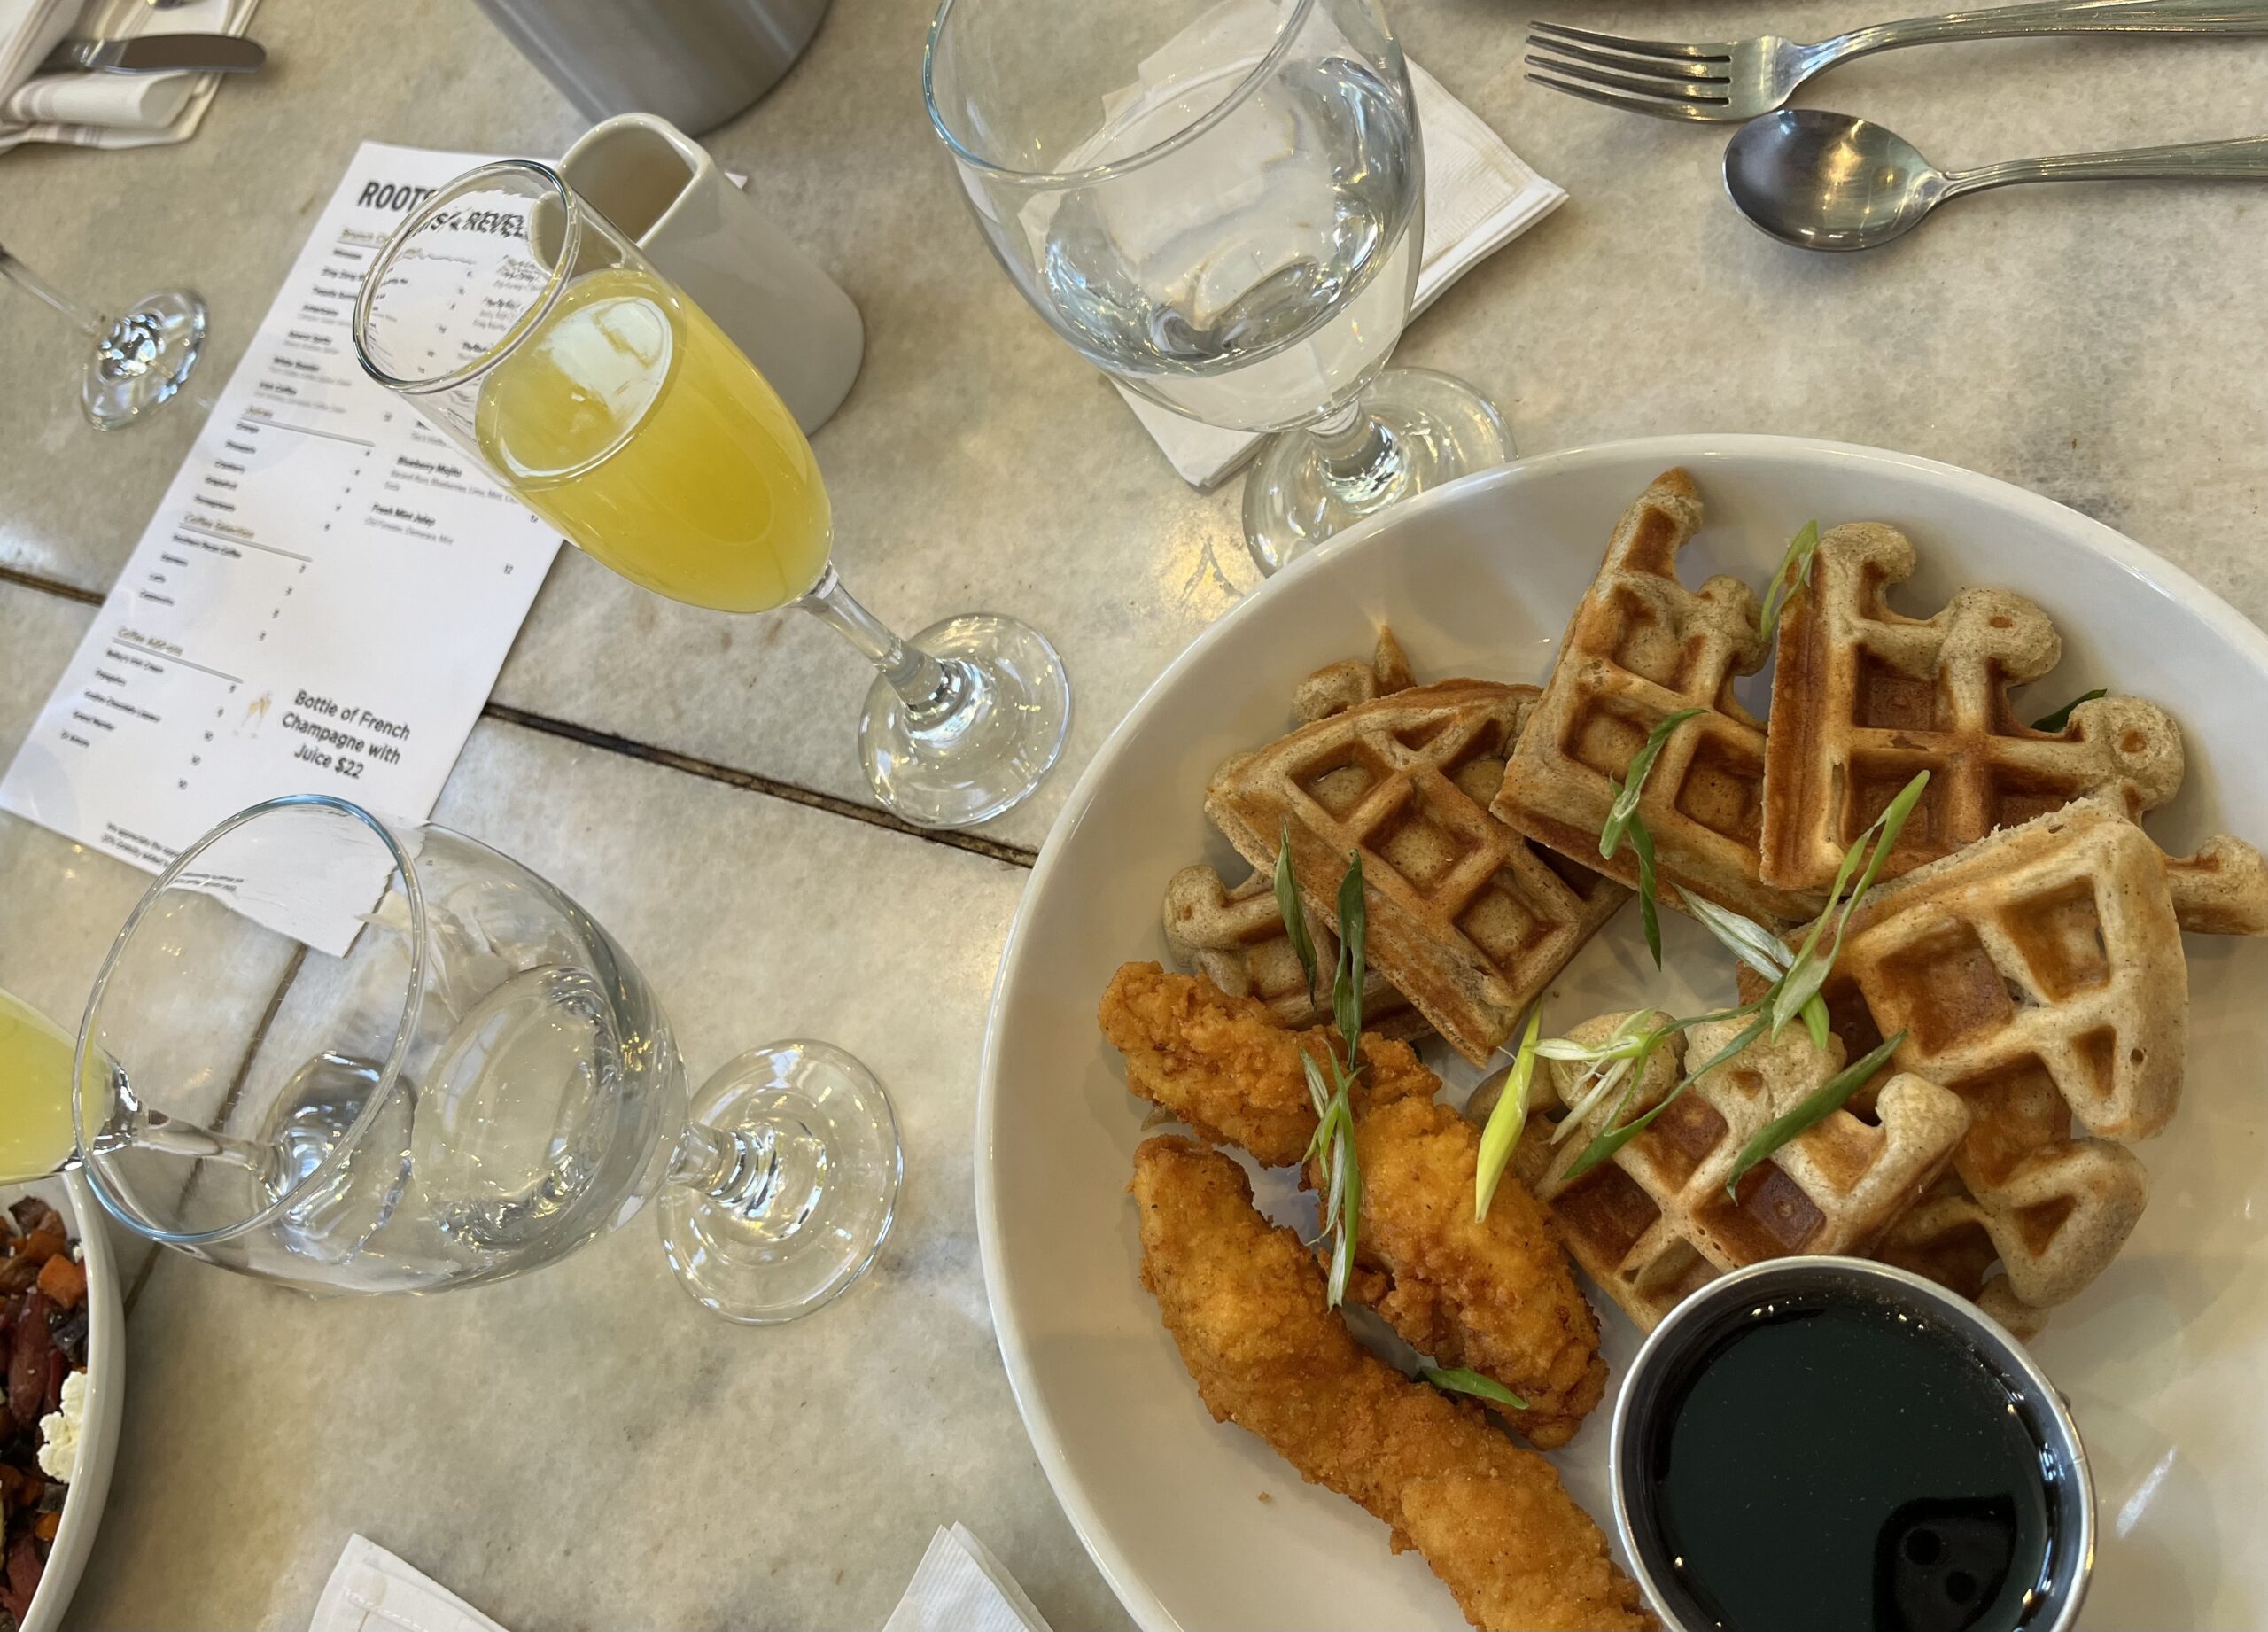 roots and revelry - Instagrammable brunch in Birmingham